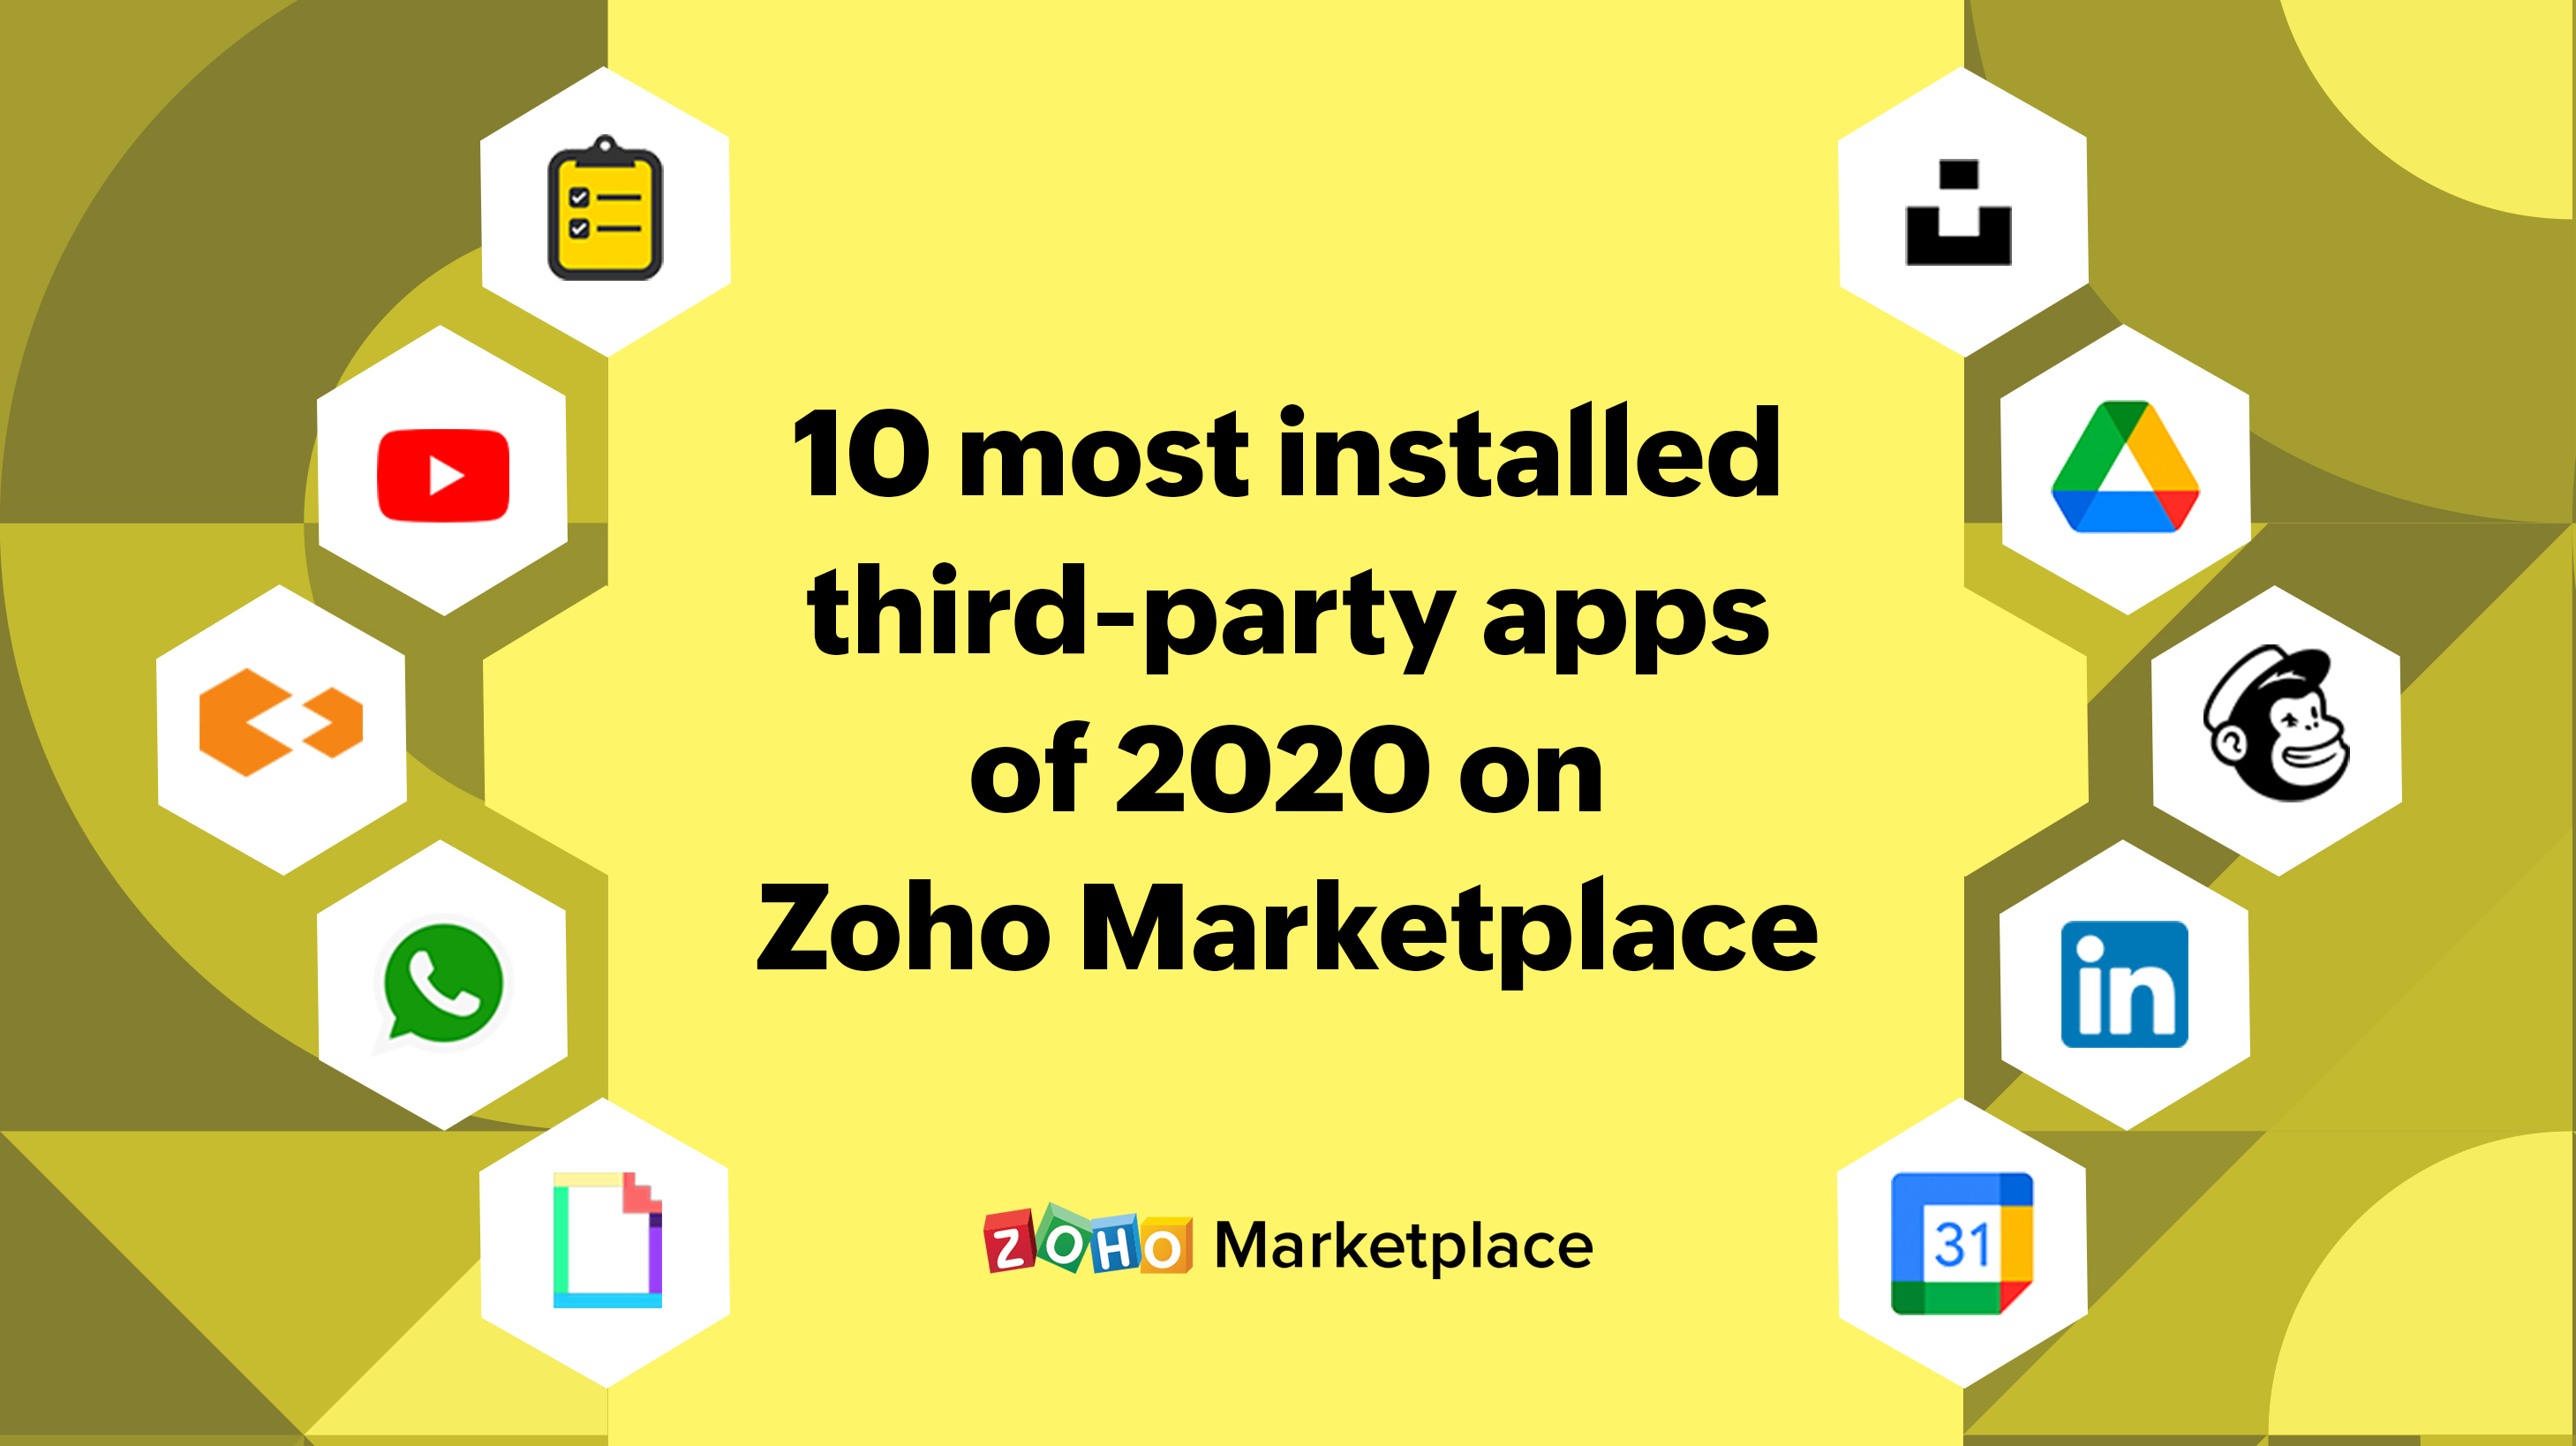 10 most installed third-party apps of 2020 on Zoho Marketplace